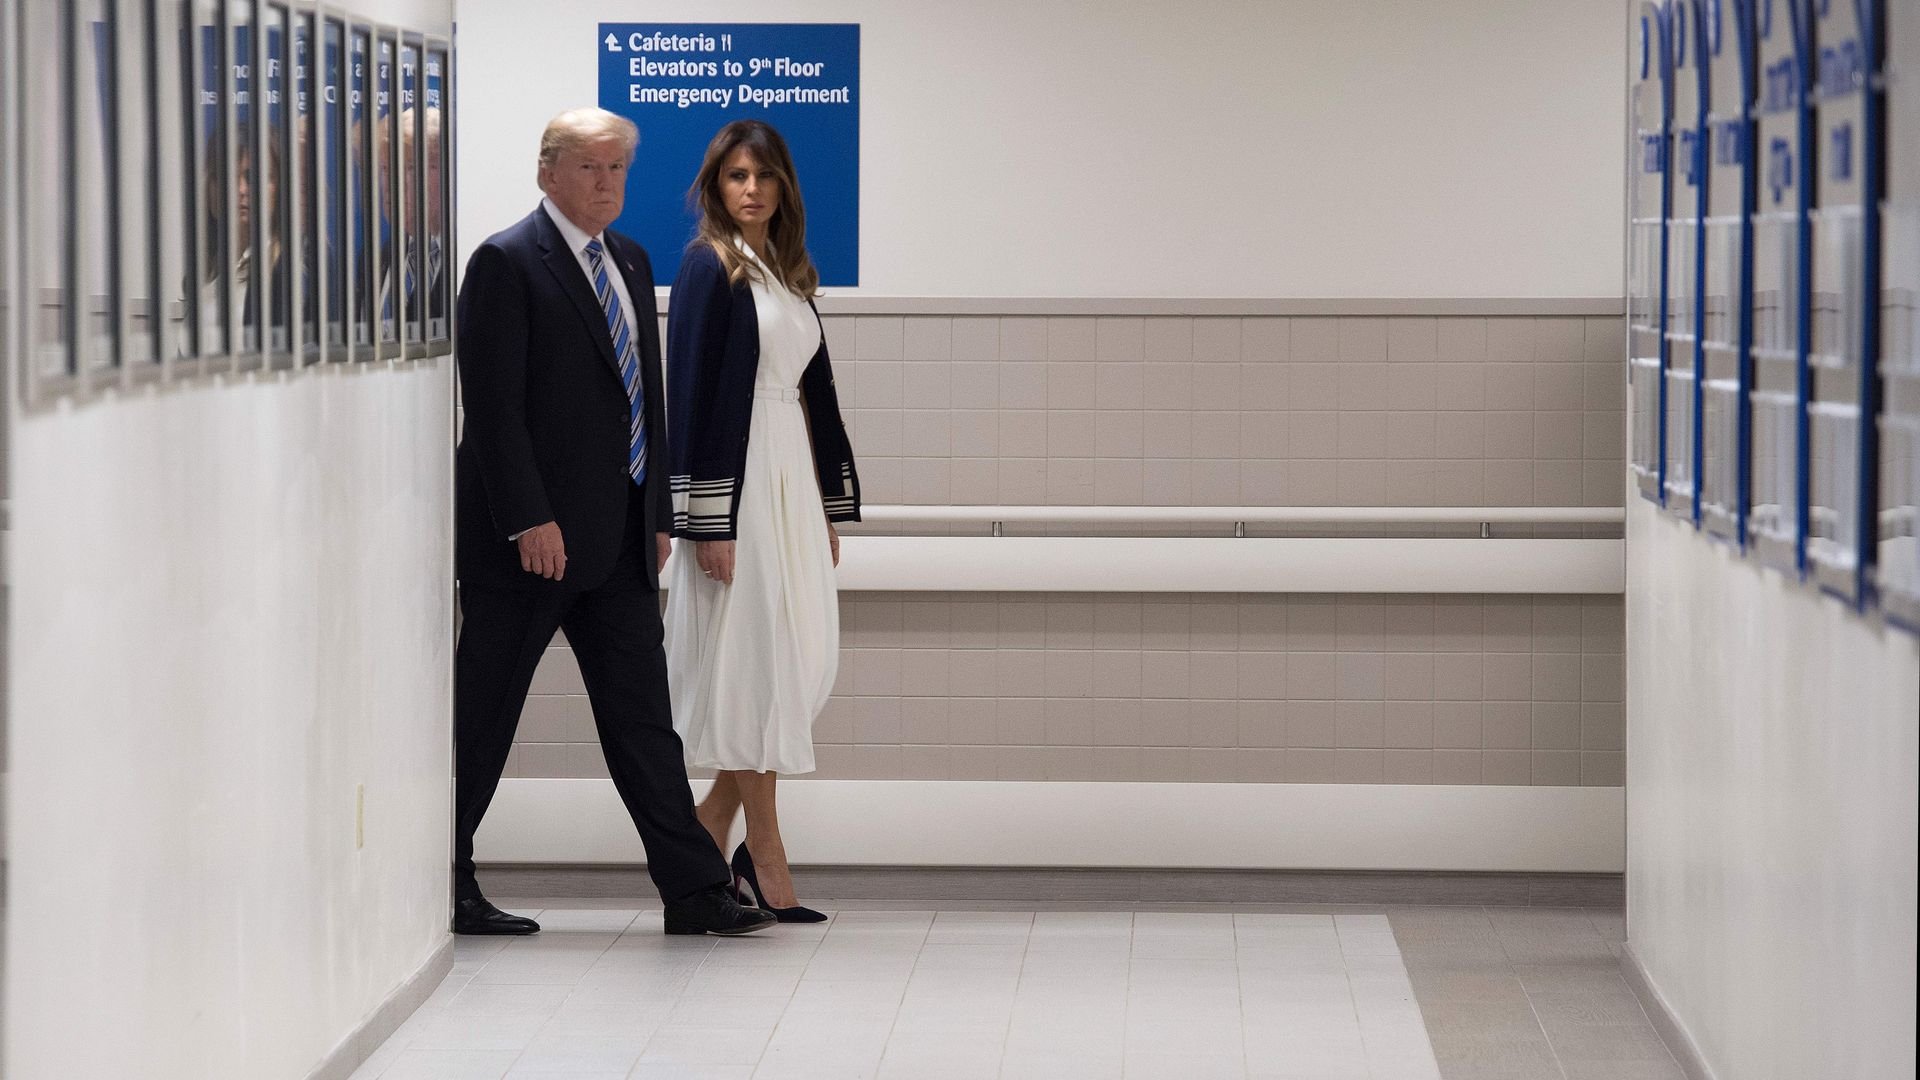 President Trump and the First Lady at a Florida hospital